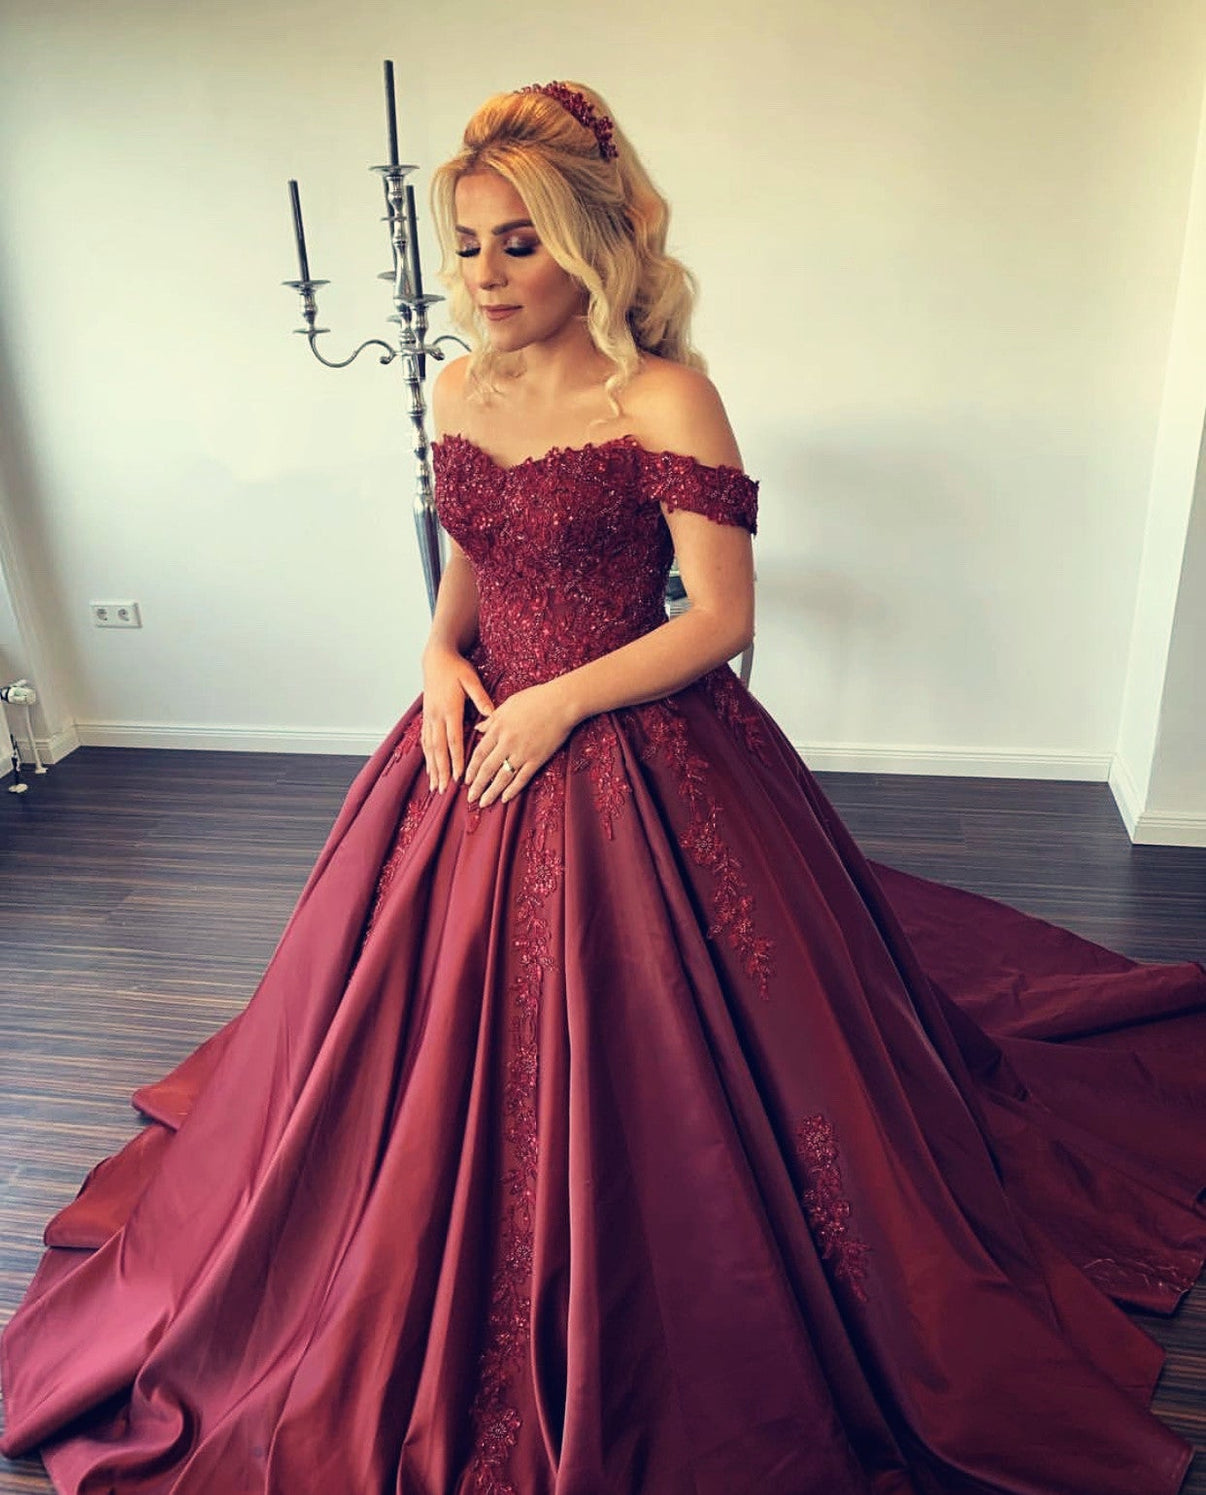 Lace Appliques Sweetheart Ball Gowns Wedding Dress Satin Off Shoulder ...